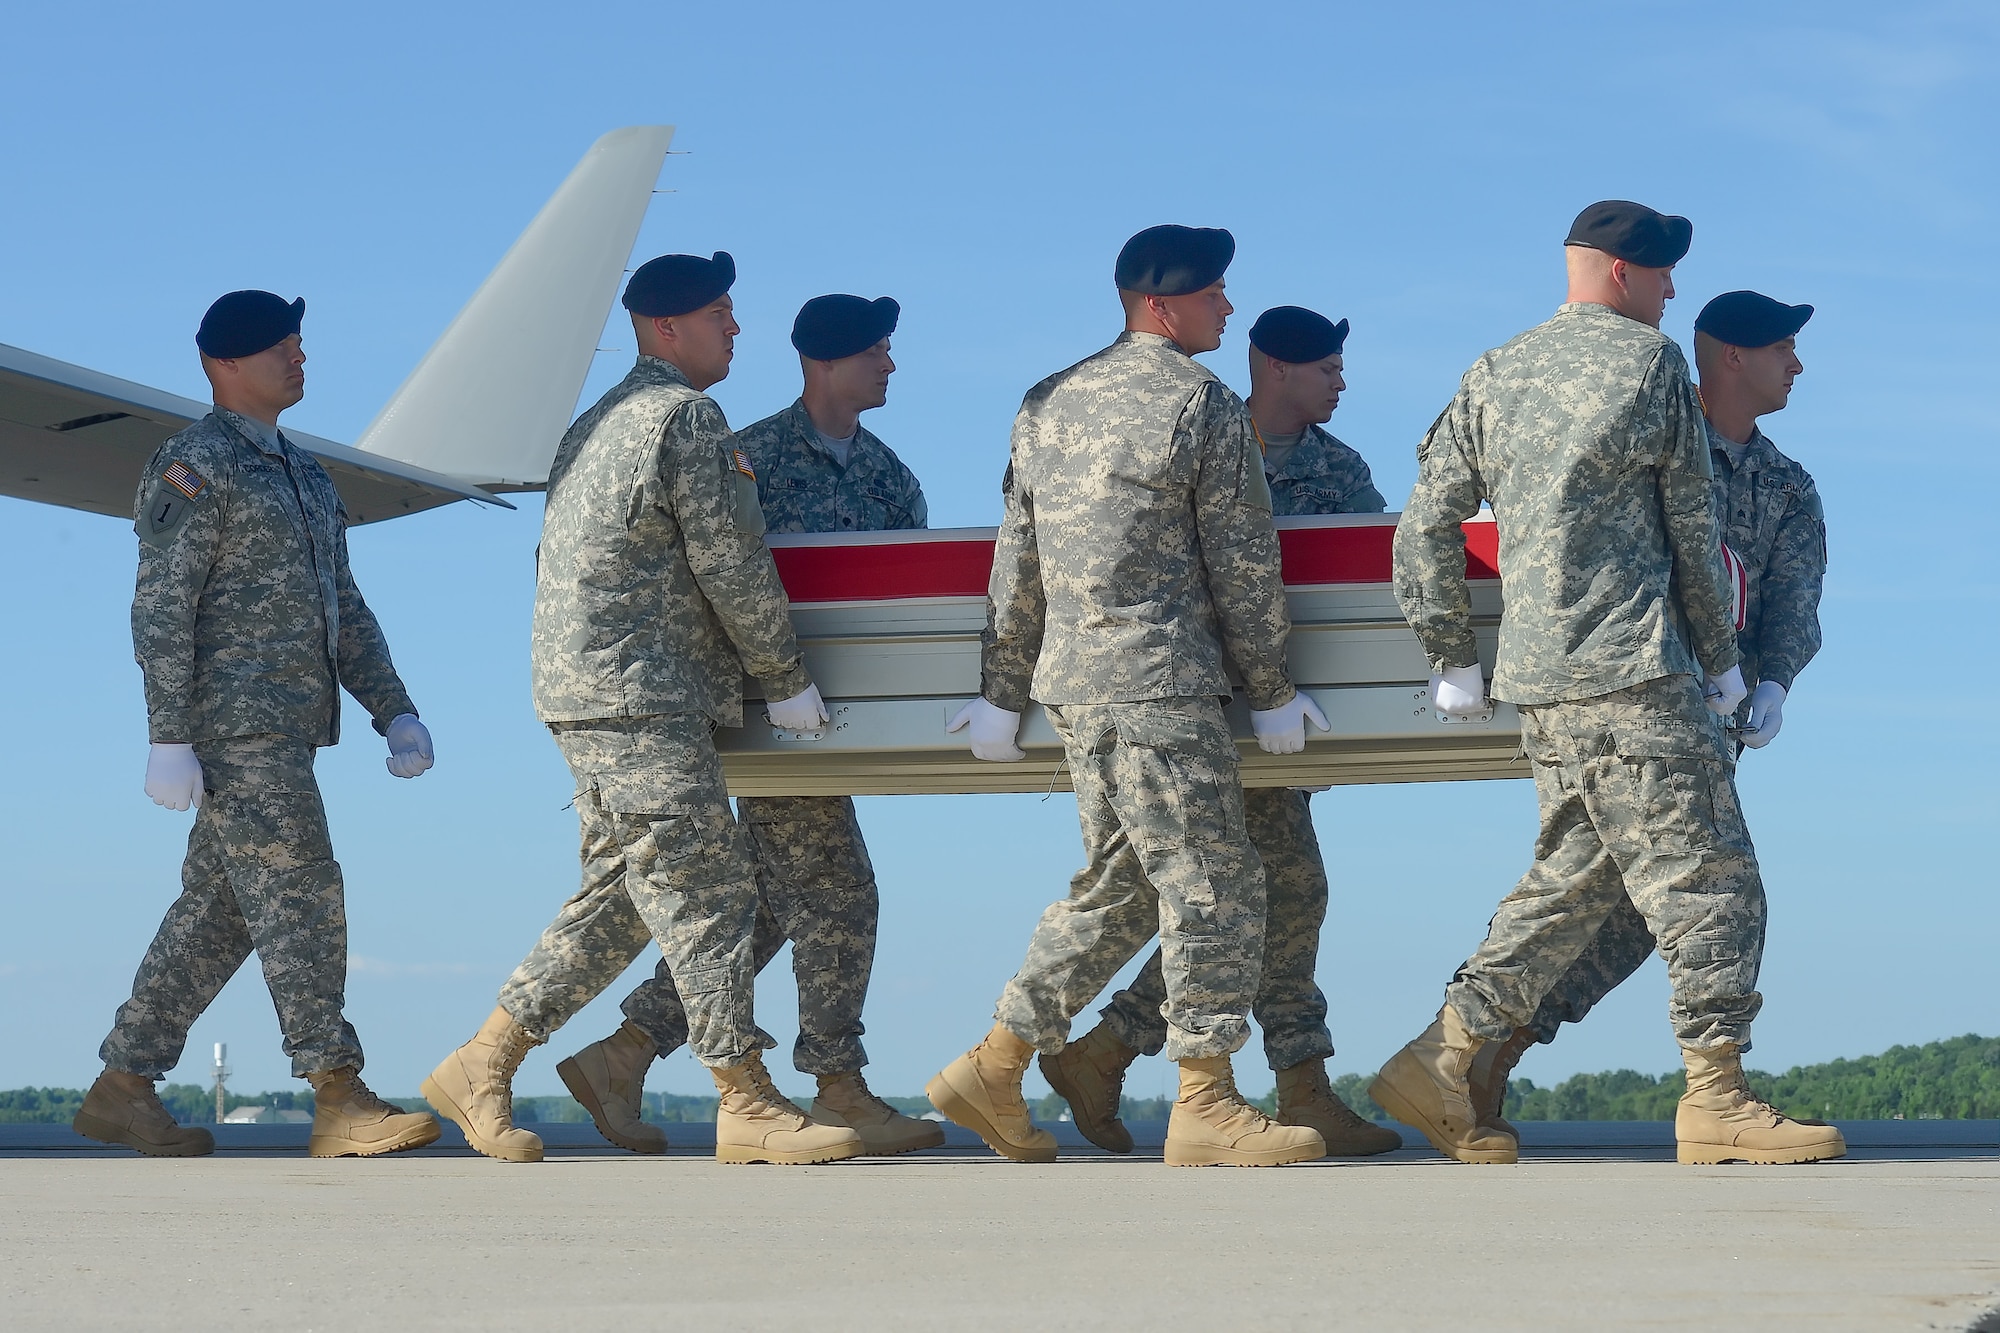 A U.S. Army carry team transfers the remains of Pfc. Jacob H. Wykstra of Thornton, Colo., during a dignified transfer, June 1, 2014, at Dover Air Force Base, Del. Wykstra was assigned to Company A, 1st Battalion, 12th Infantry Regiment, 4th Brigade Combat Team, 4th Infantry Division, Fort Carson, Colo. (U.S. Air Force photo/Greg Davis)